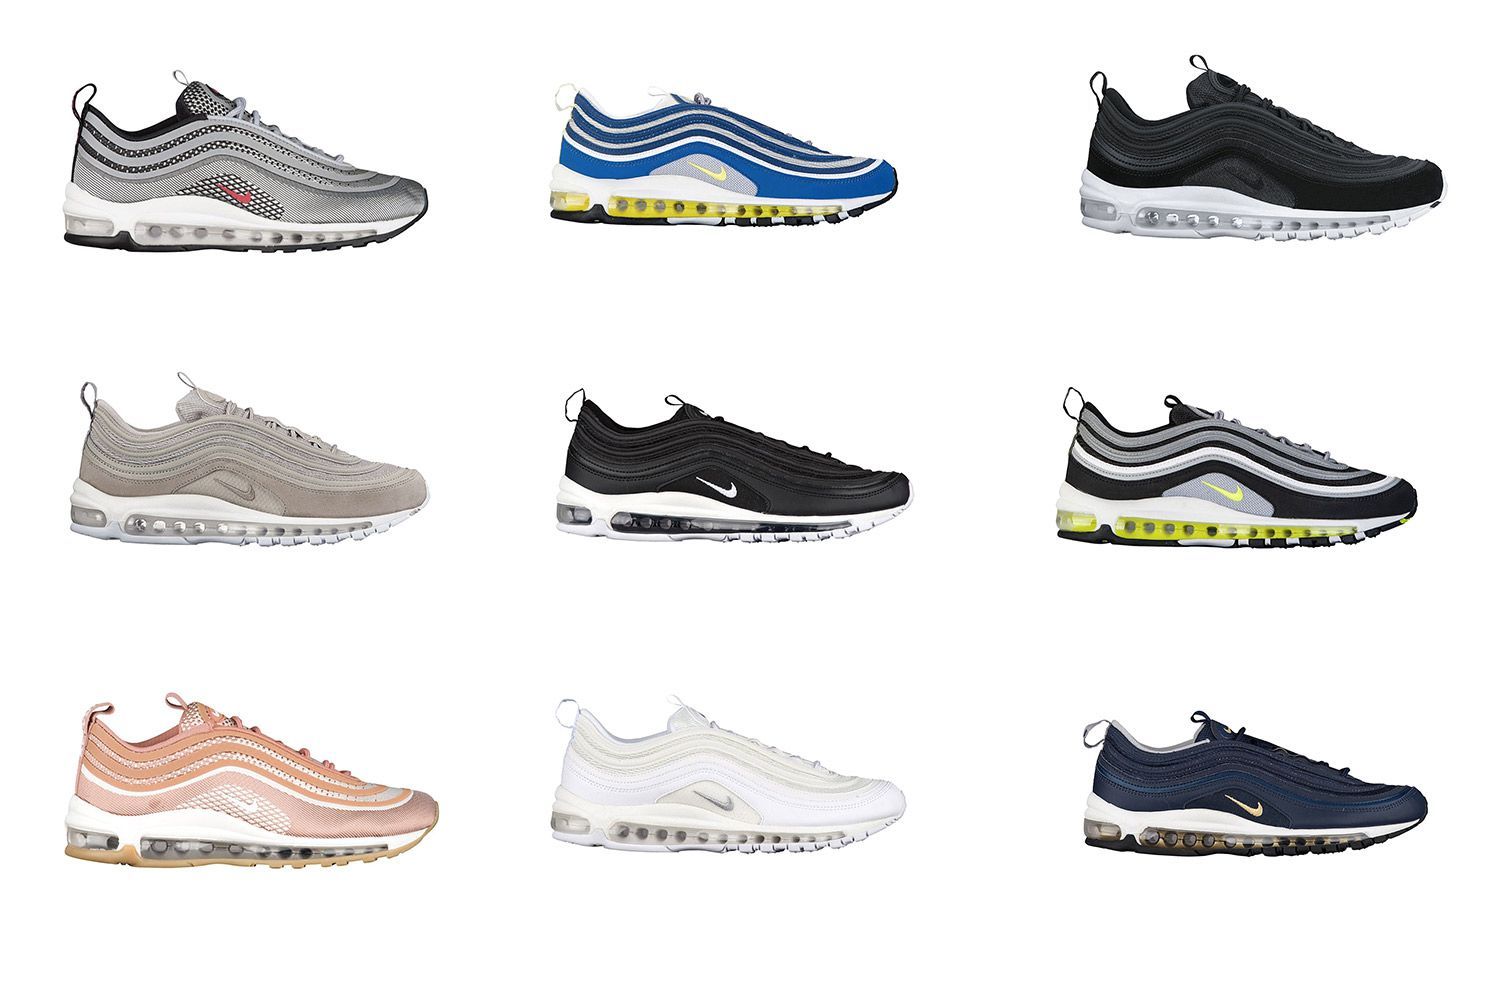 Nike release 20 new Air Max colorways